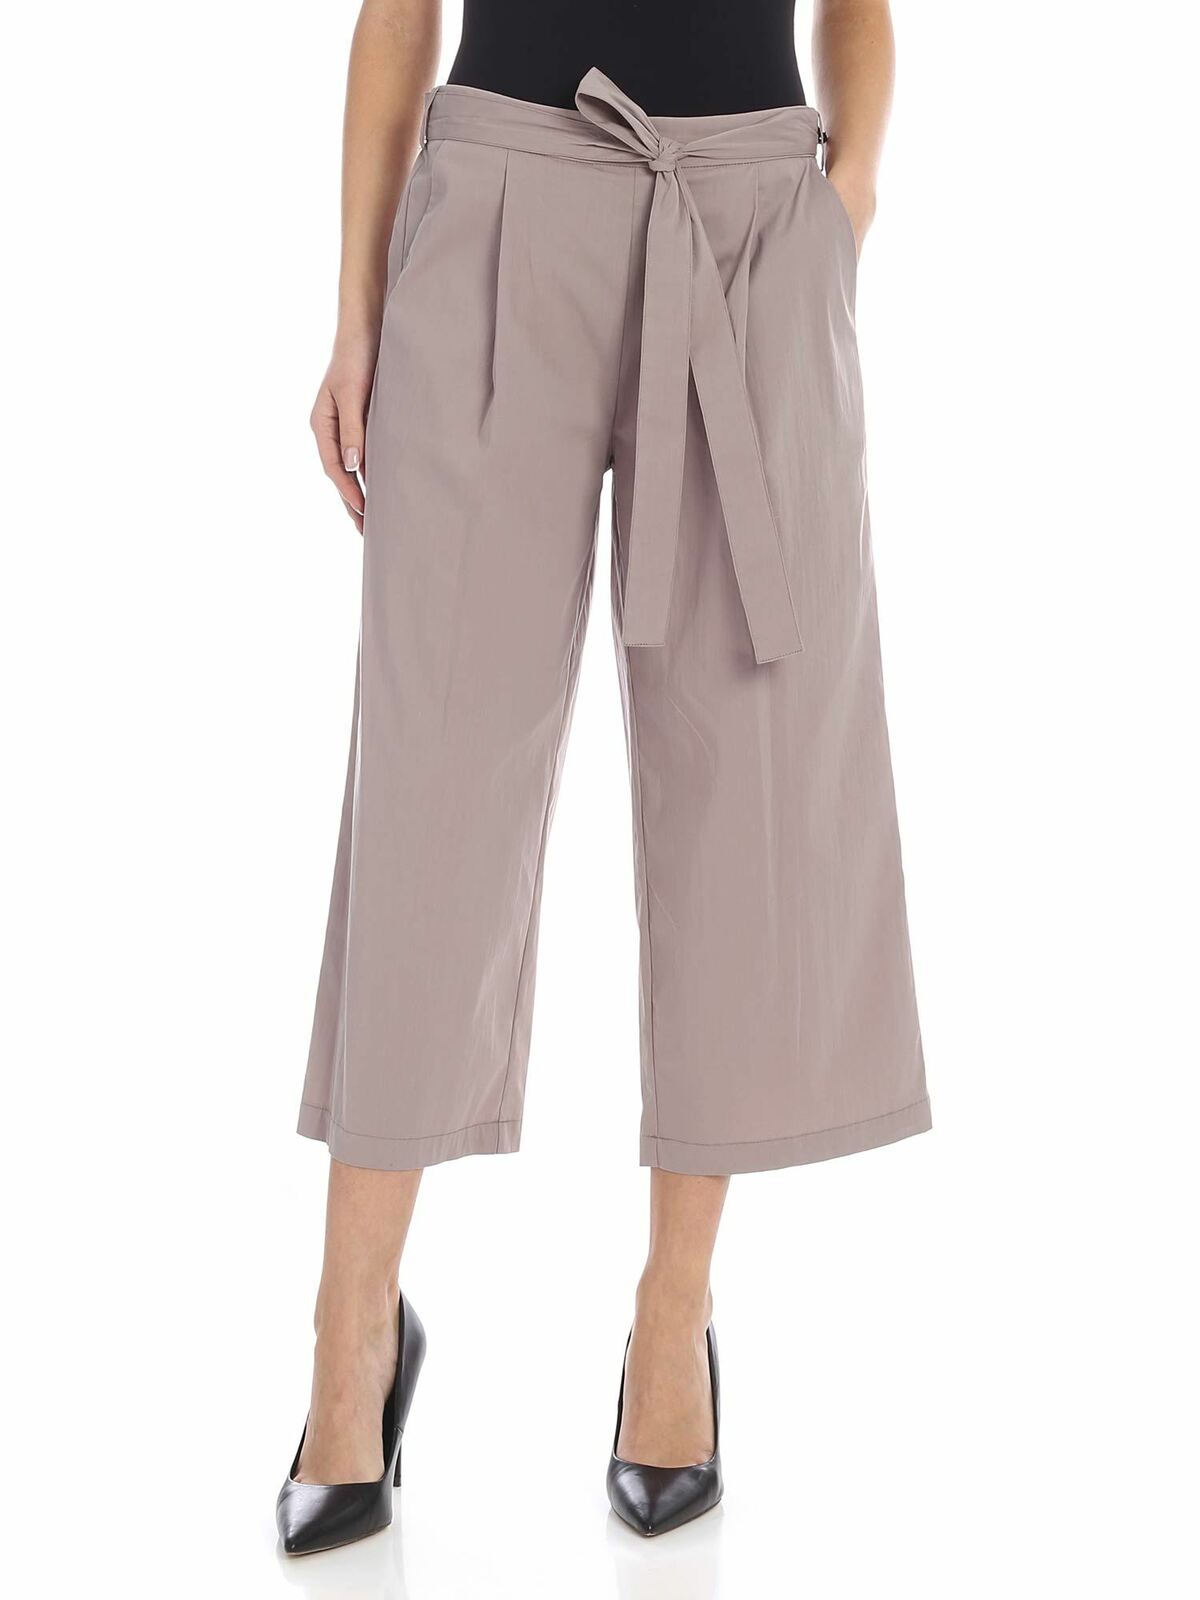 Dkny Crop Trousers In Dove Grey With Bow At The Waist In Brown